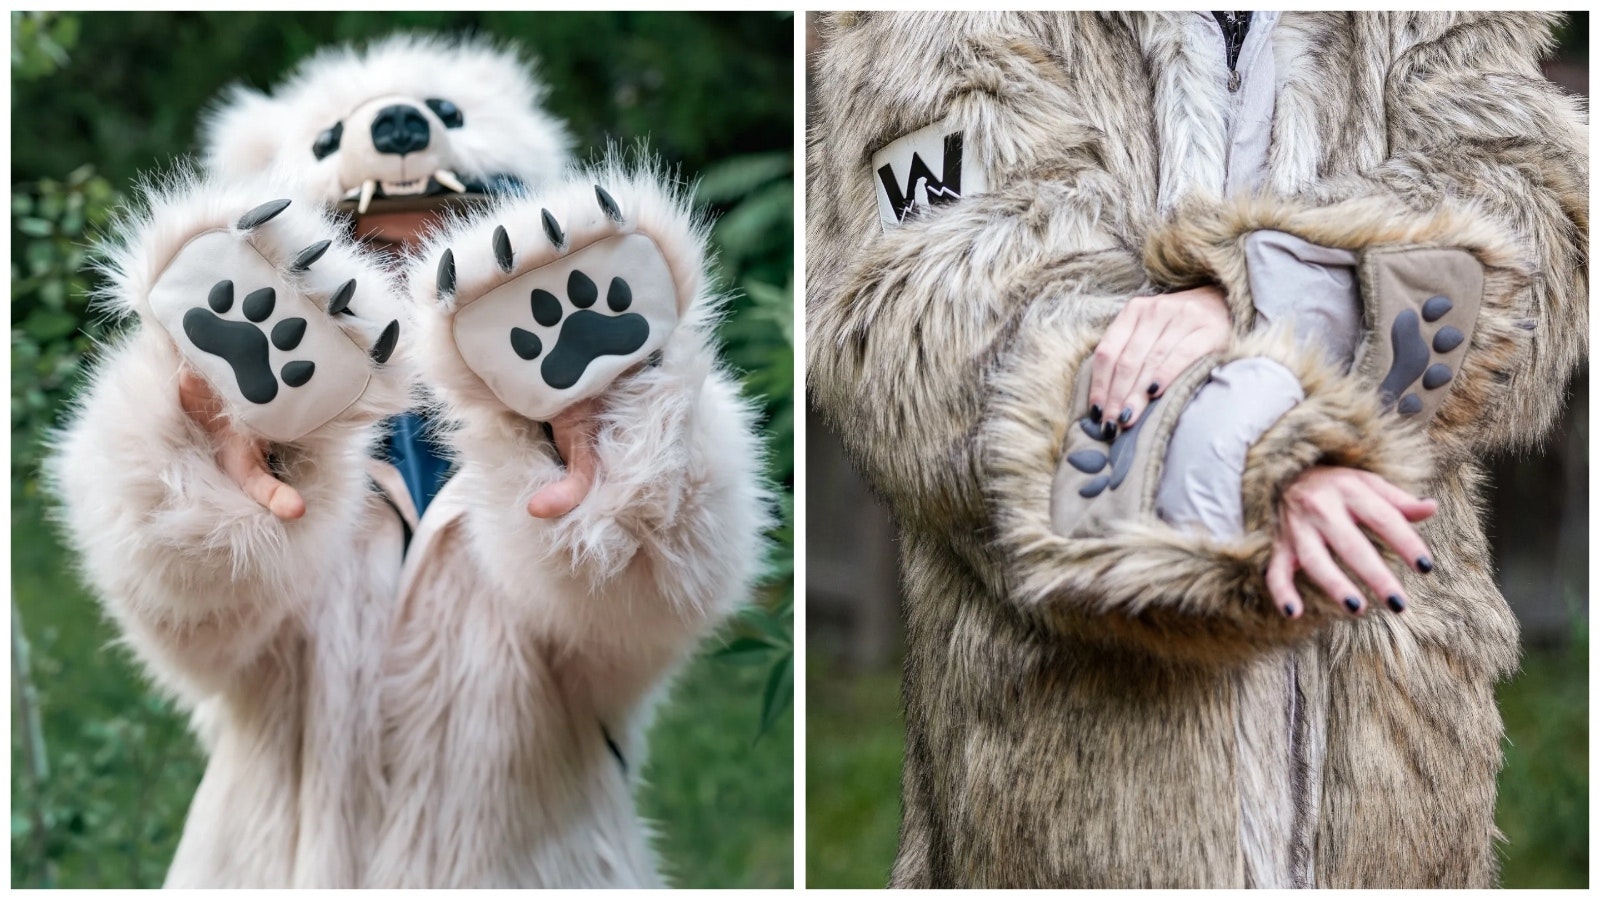 The "paws" of the wildcats are detachable mittens that have pads and claws.